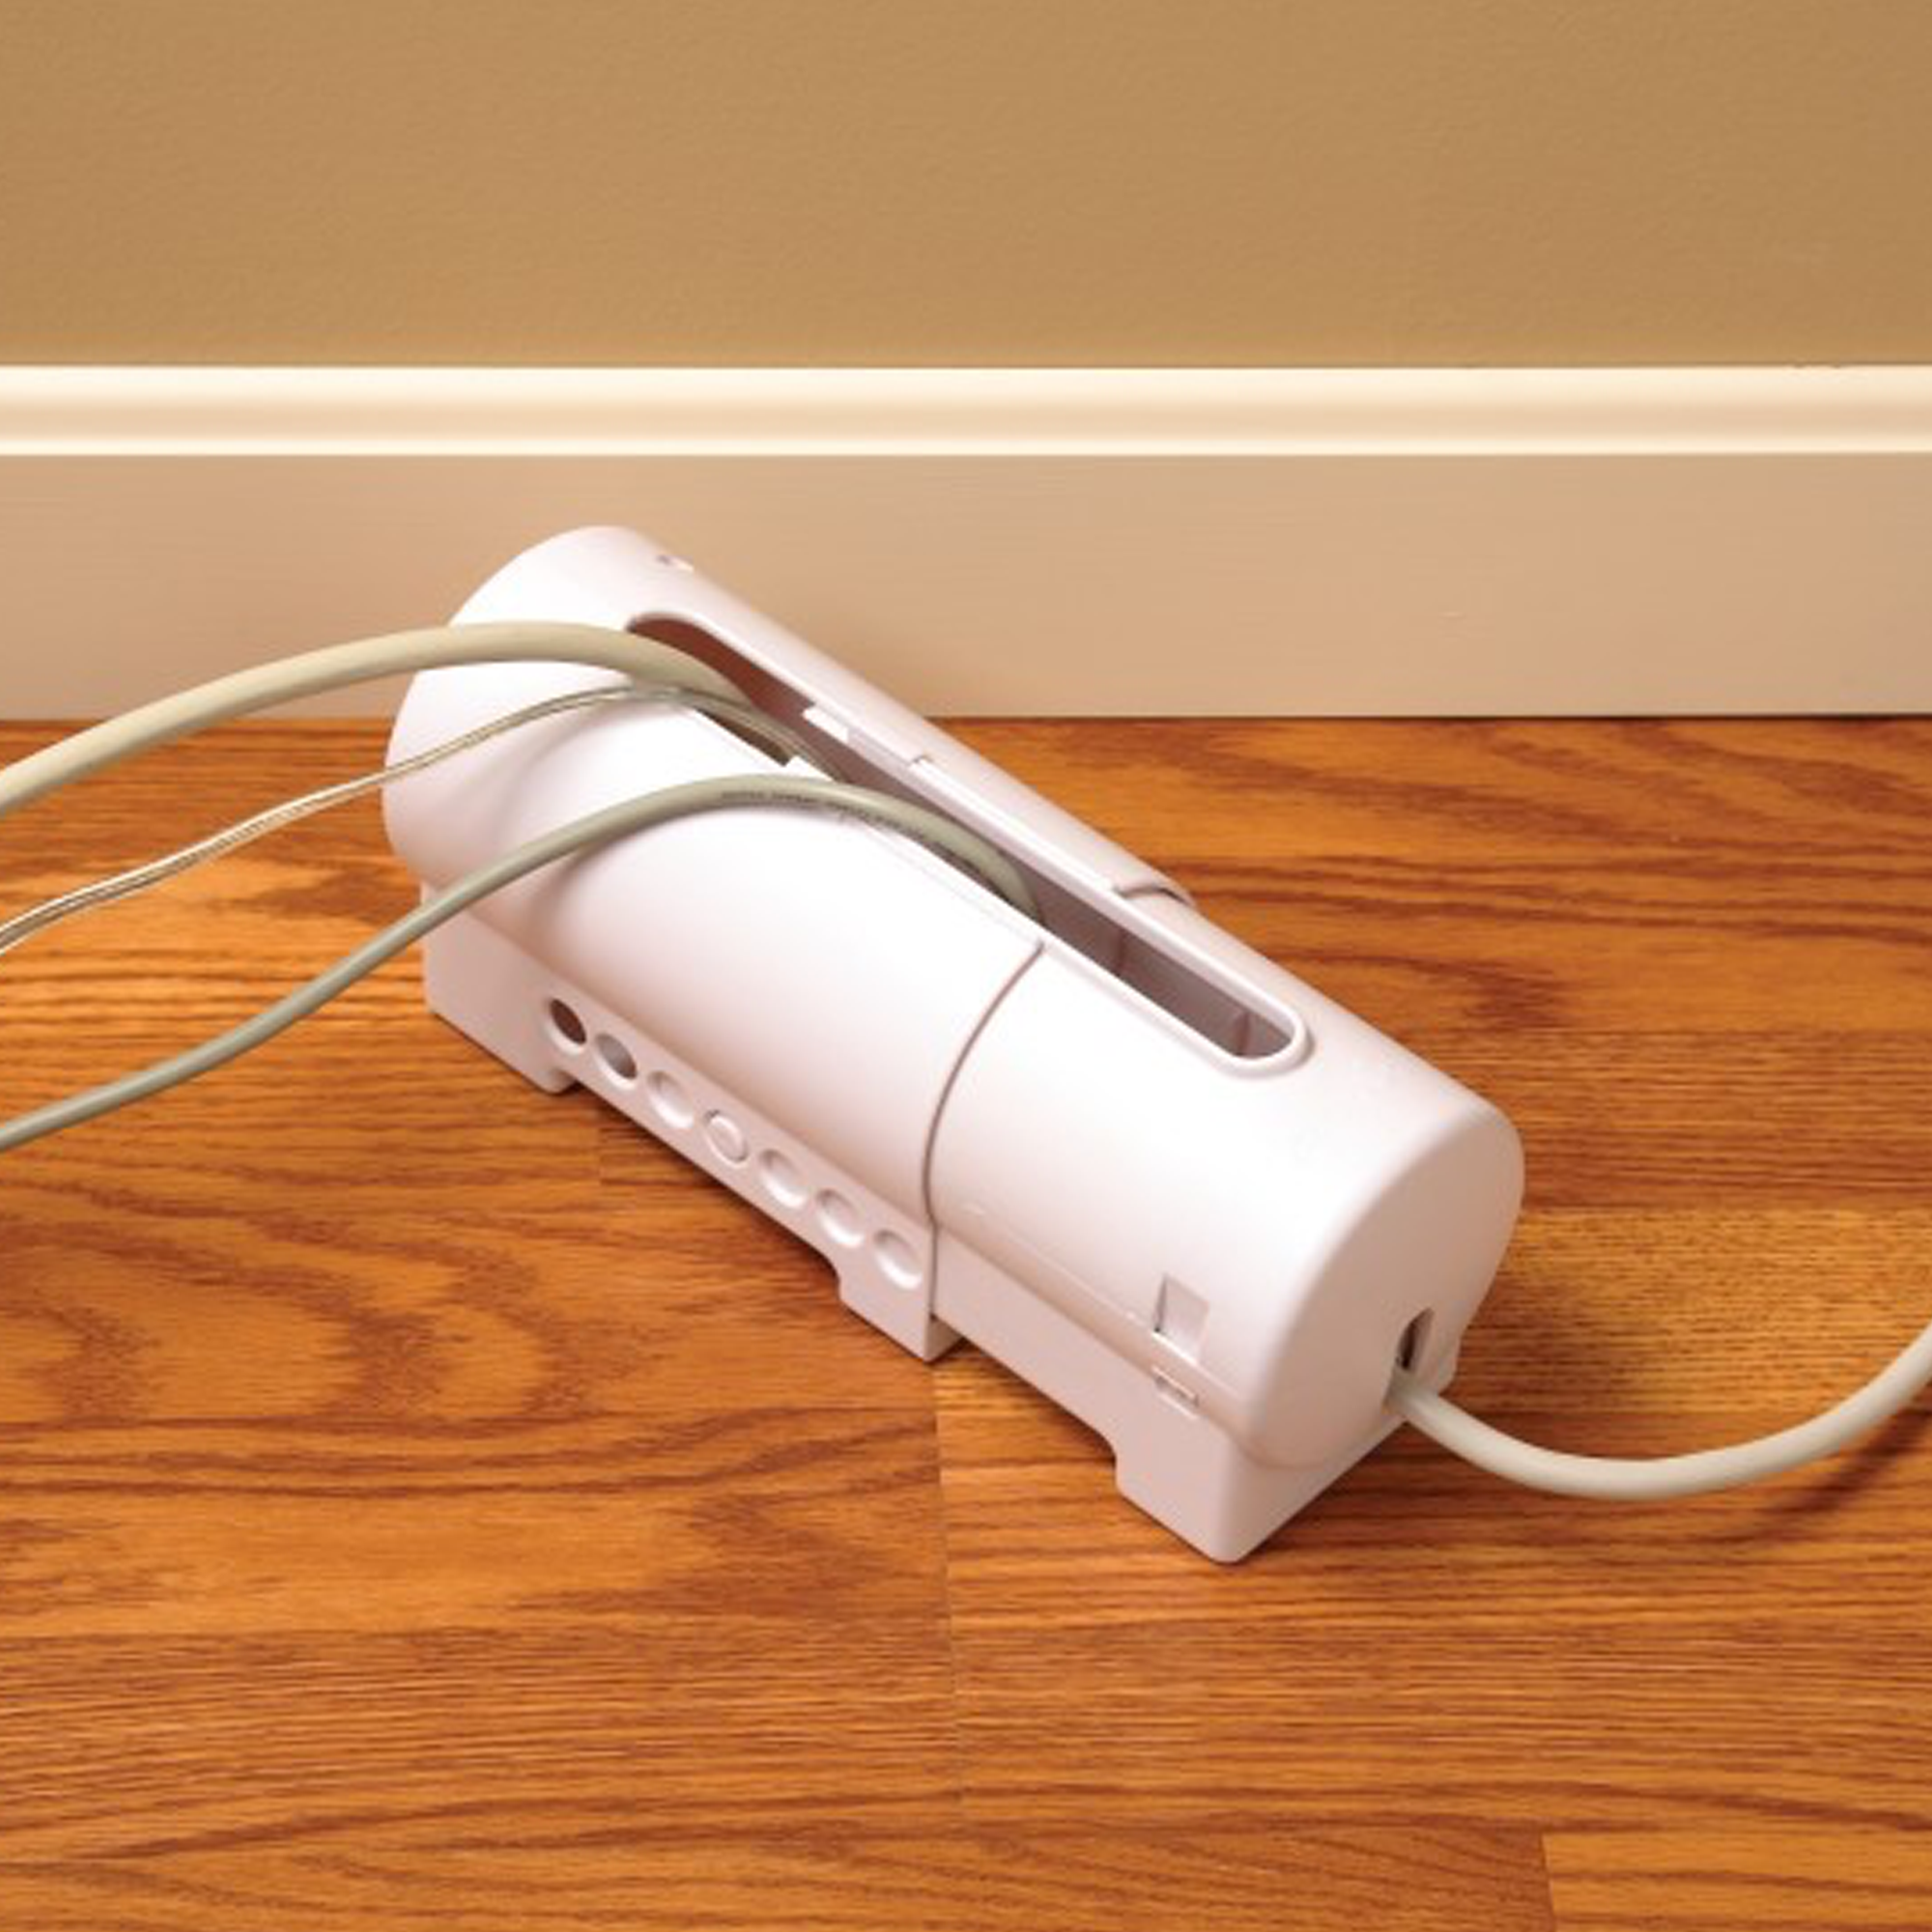 power strip protector in use with multiple wires going through it